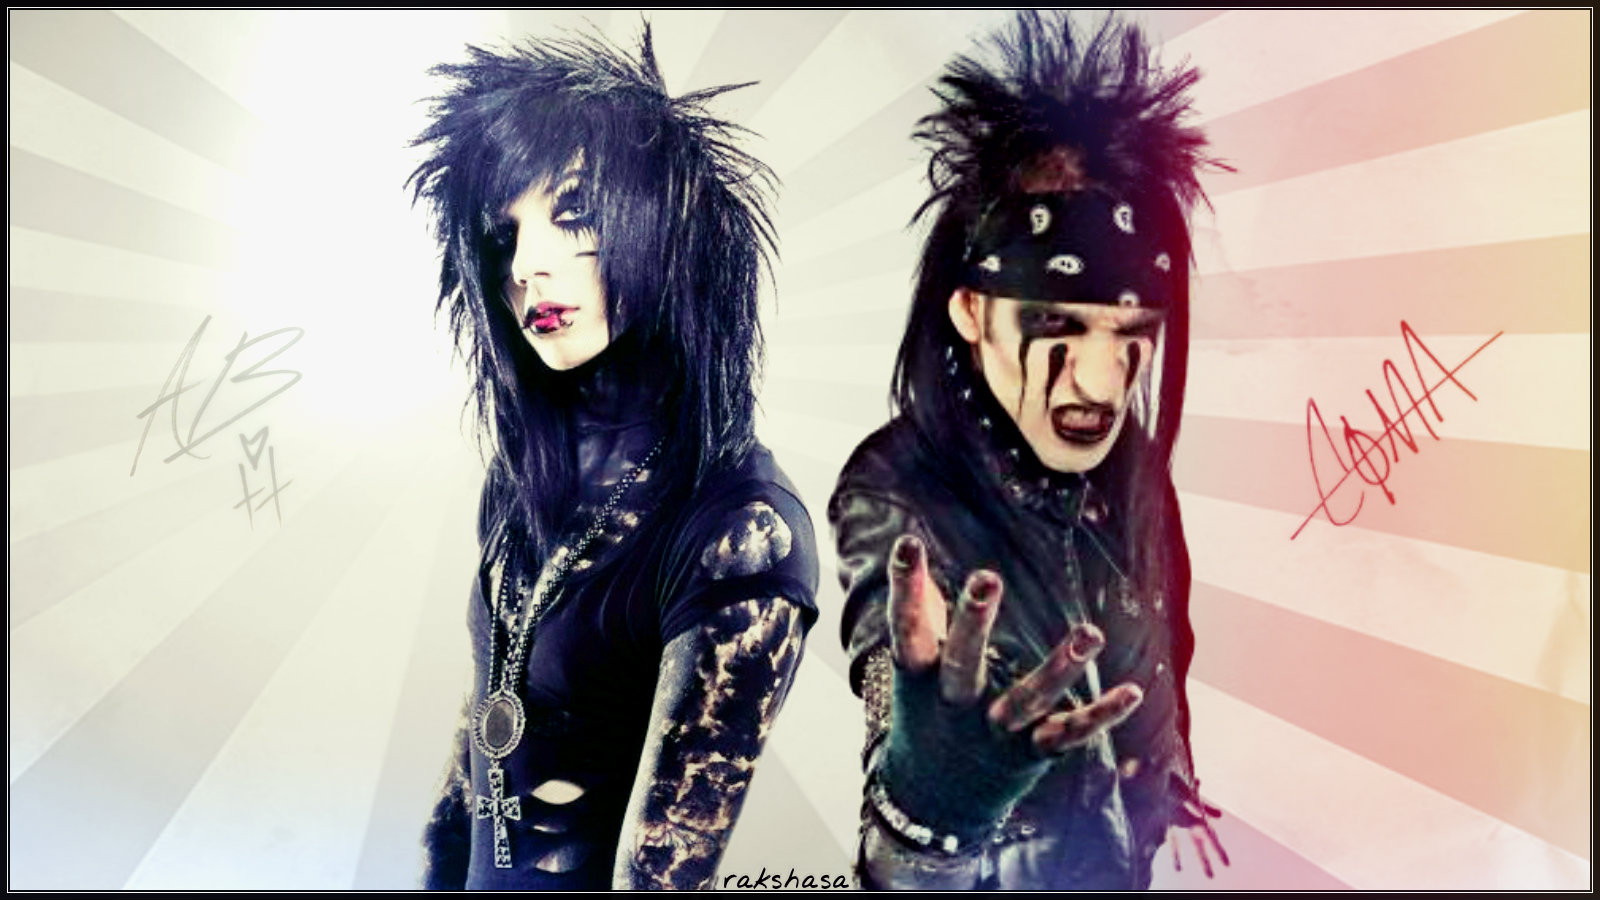 Christian A And Andy Biersack Black Veil Brides